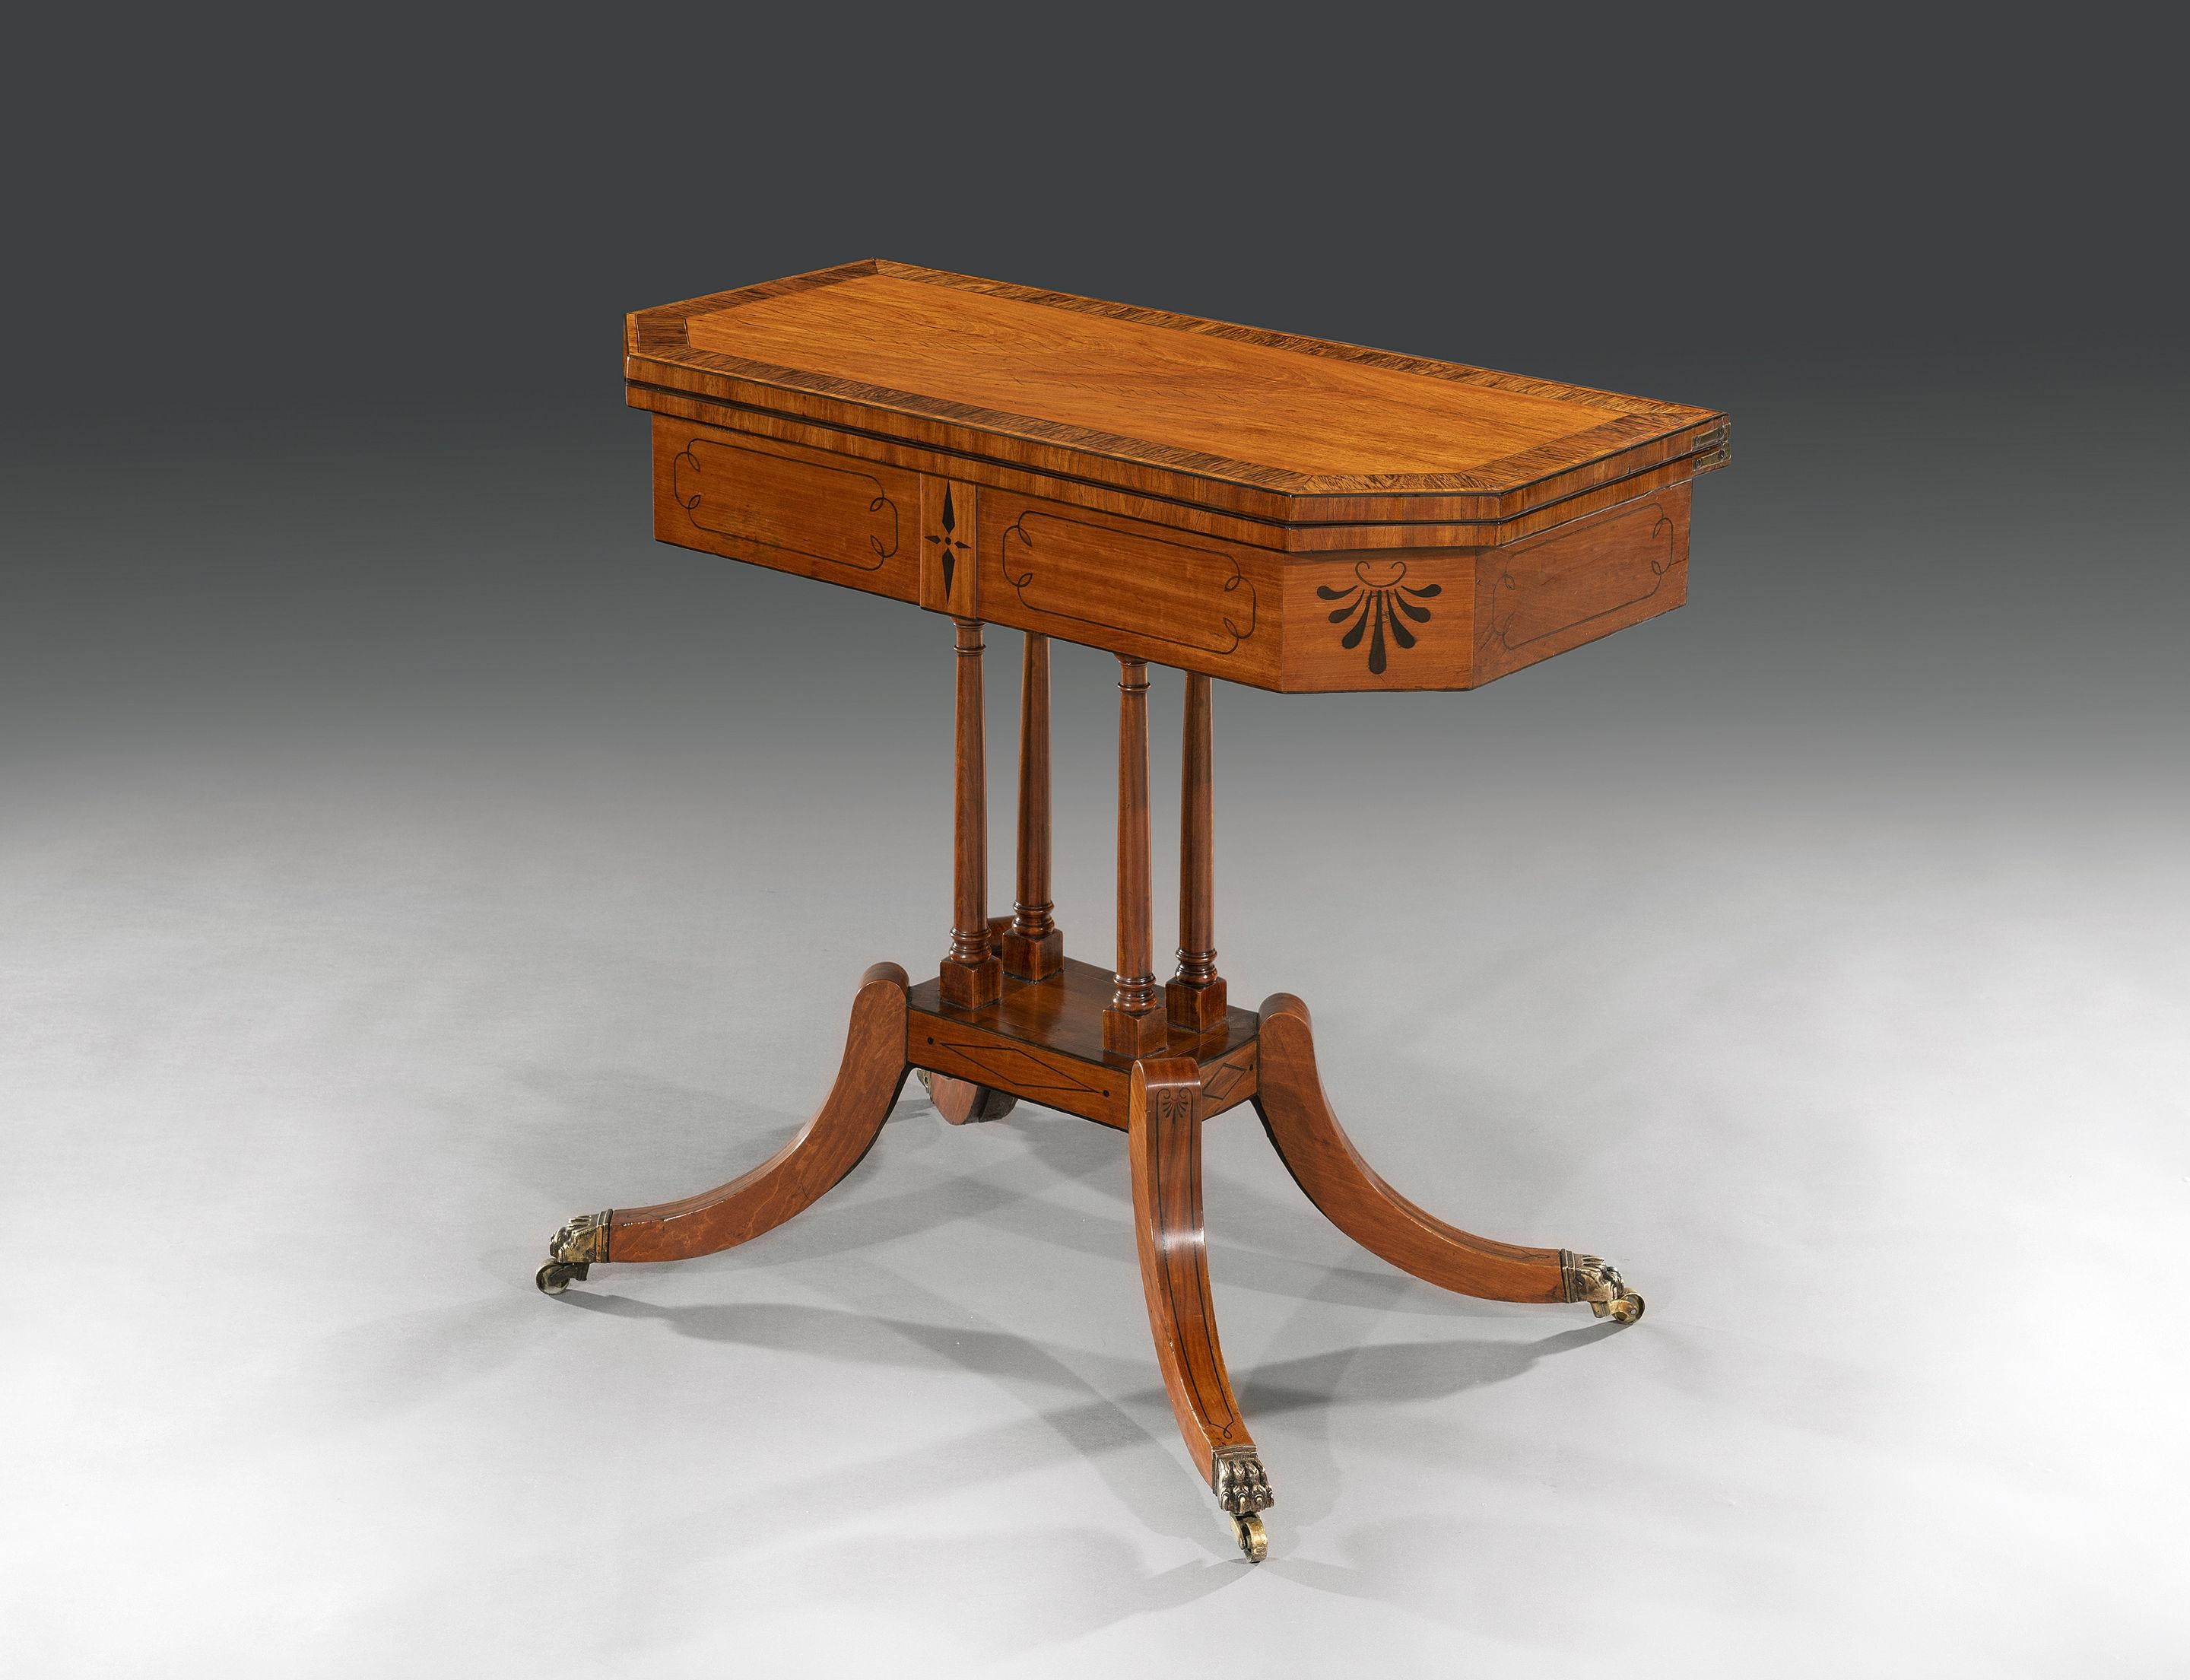 Late George III Sheraton Period Satinwood & Ebony Card Table of Small Proportion In Good Condition For Sale In Bradford on Avon, GB